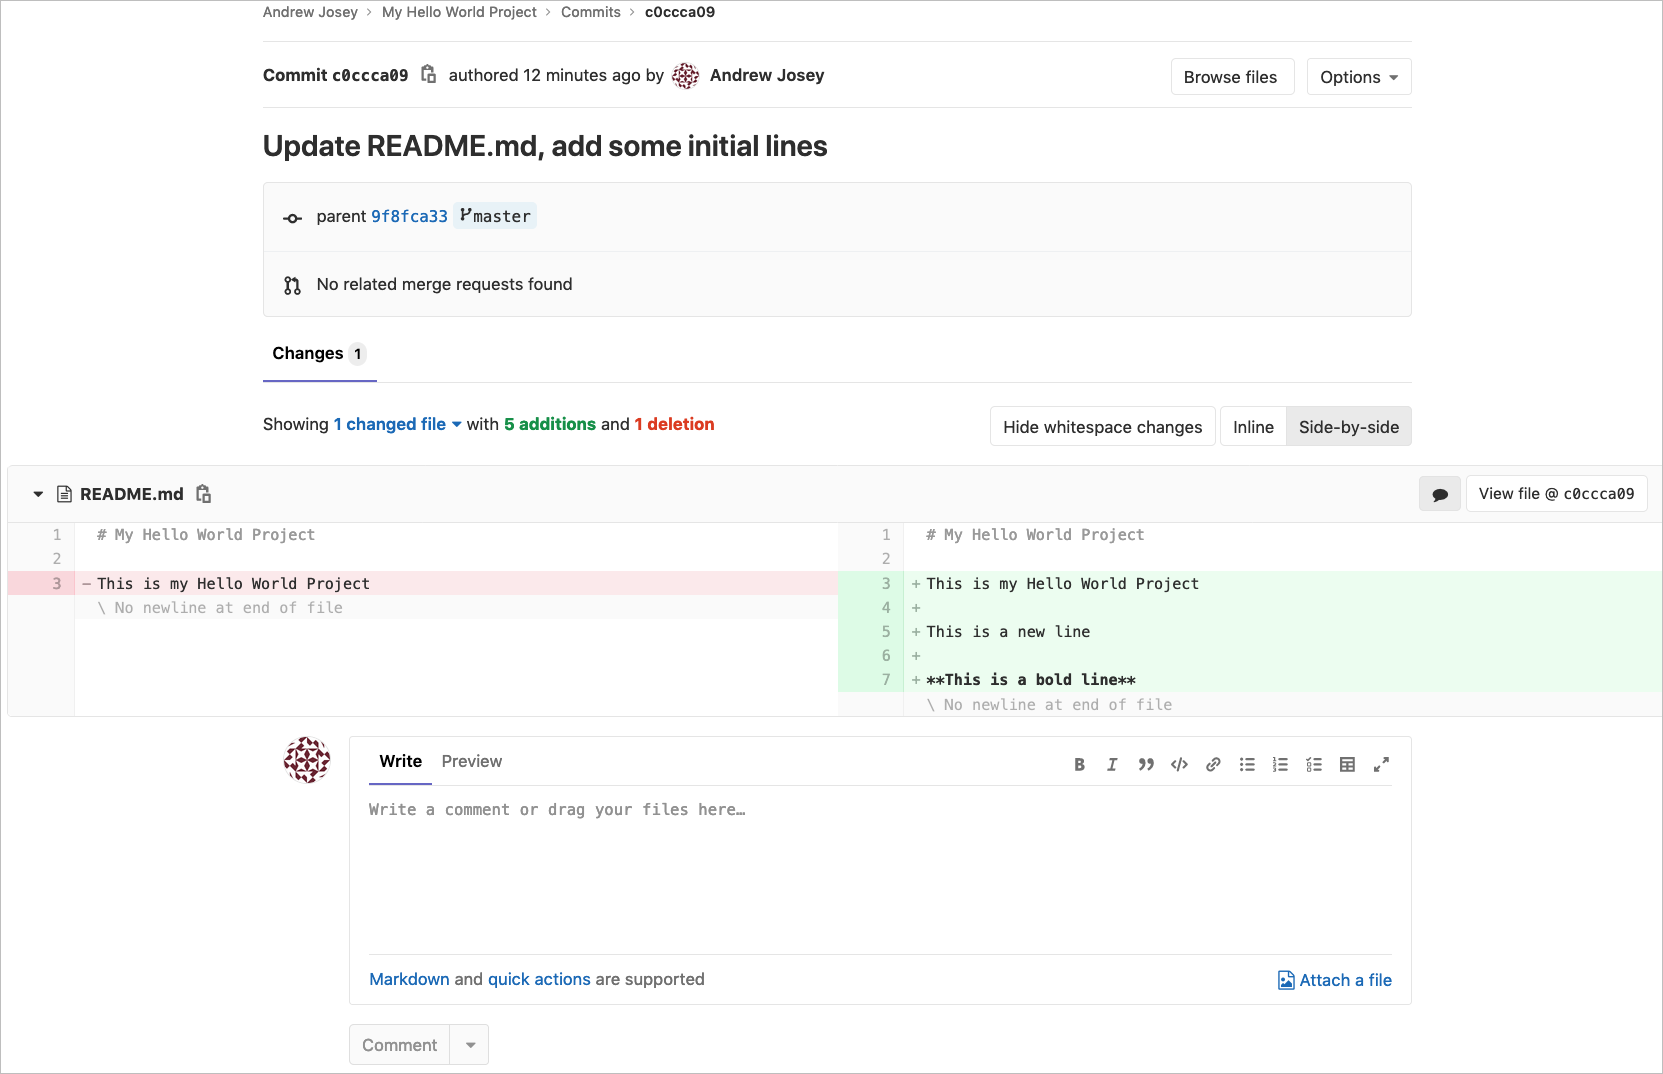 View the Commit Details